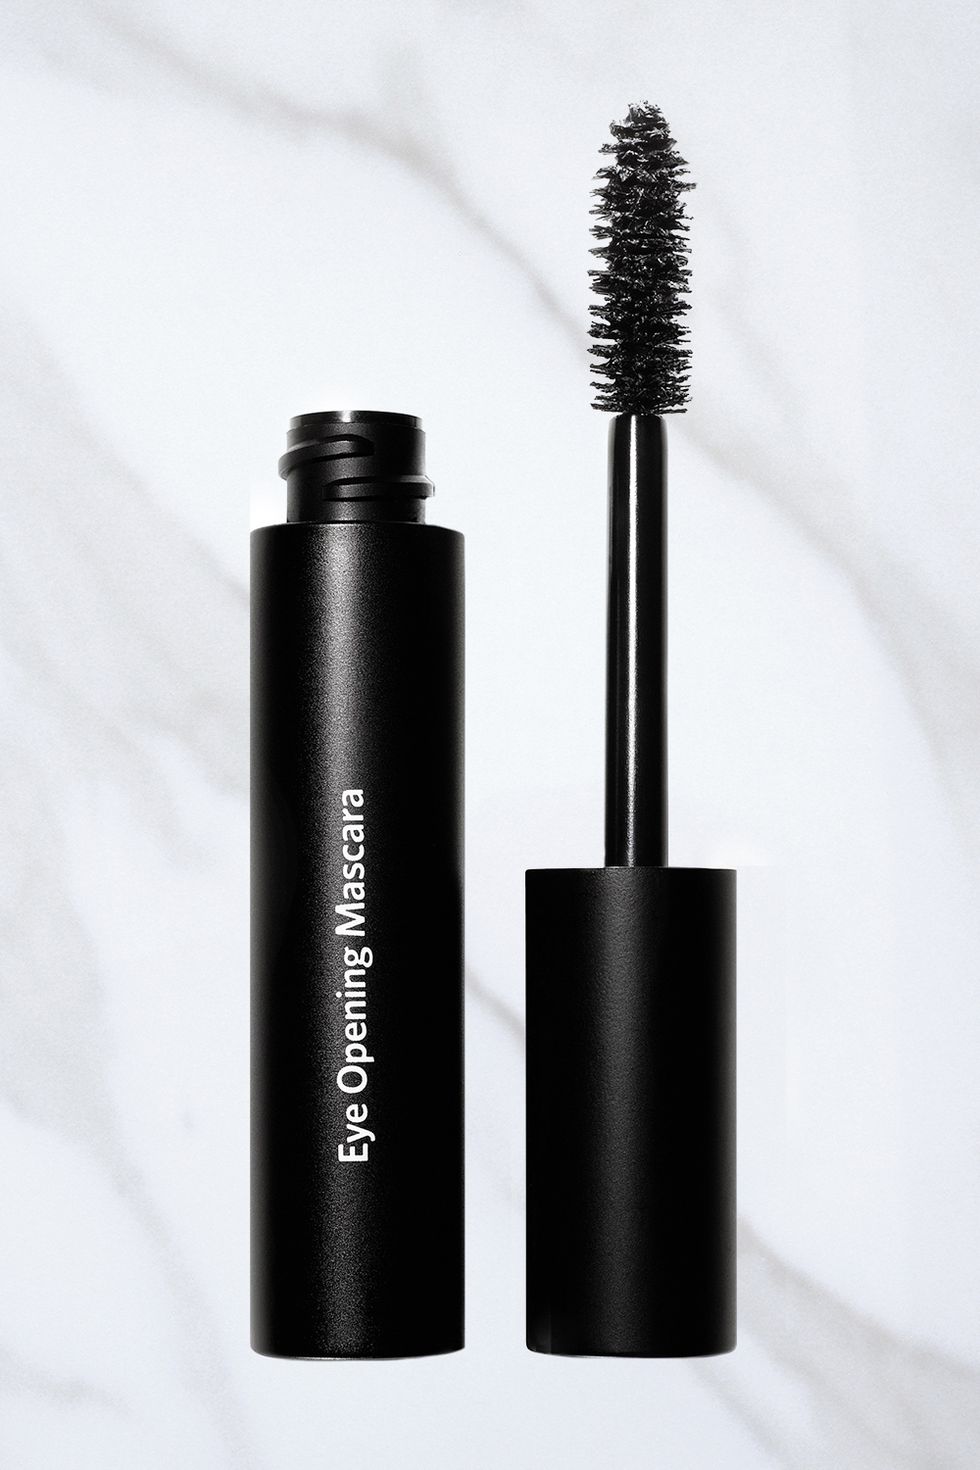 <p>Swipe on a few coats of <a href="https://www.bobbibrowncosmetics.com/product/14460/39424/New/Eye-Opening-Mascara/SS16" target="_blank">Bobbi Brown Eye Opening Mascara</a>, $30, for long, flirty lashes that you'll want to bat shamelessly all night long. </p>